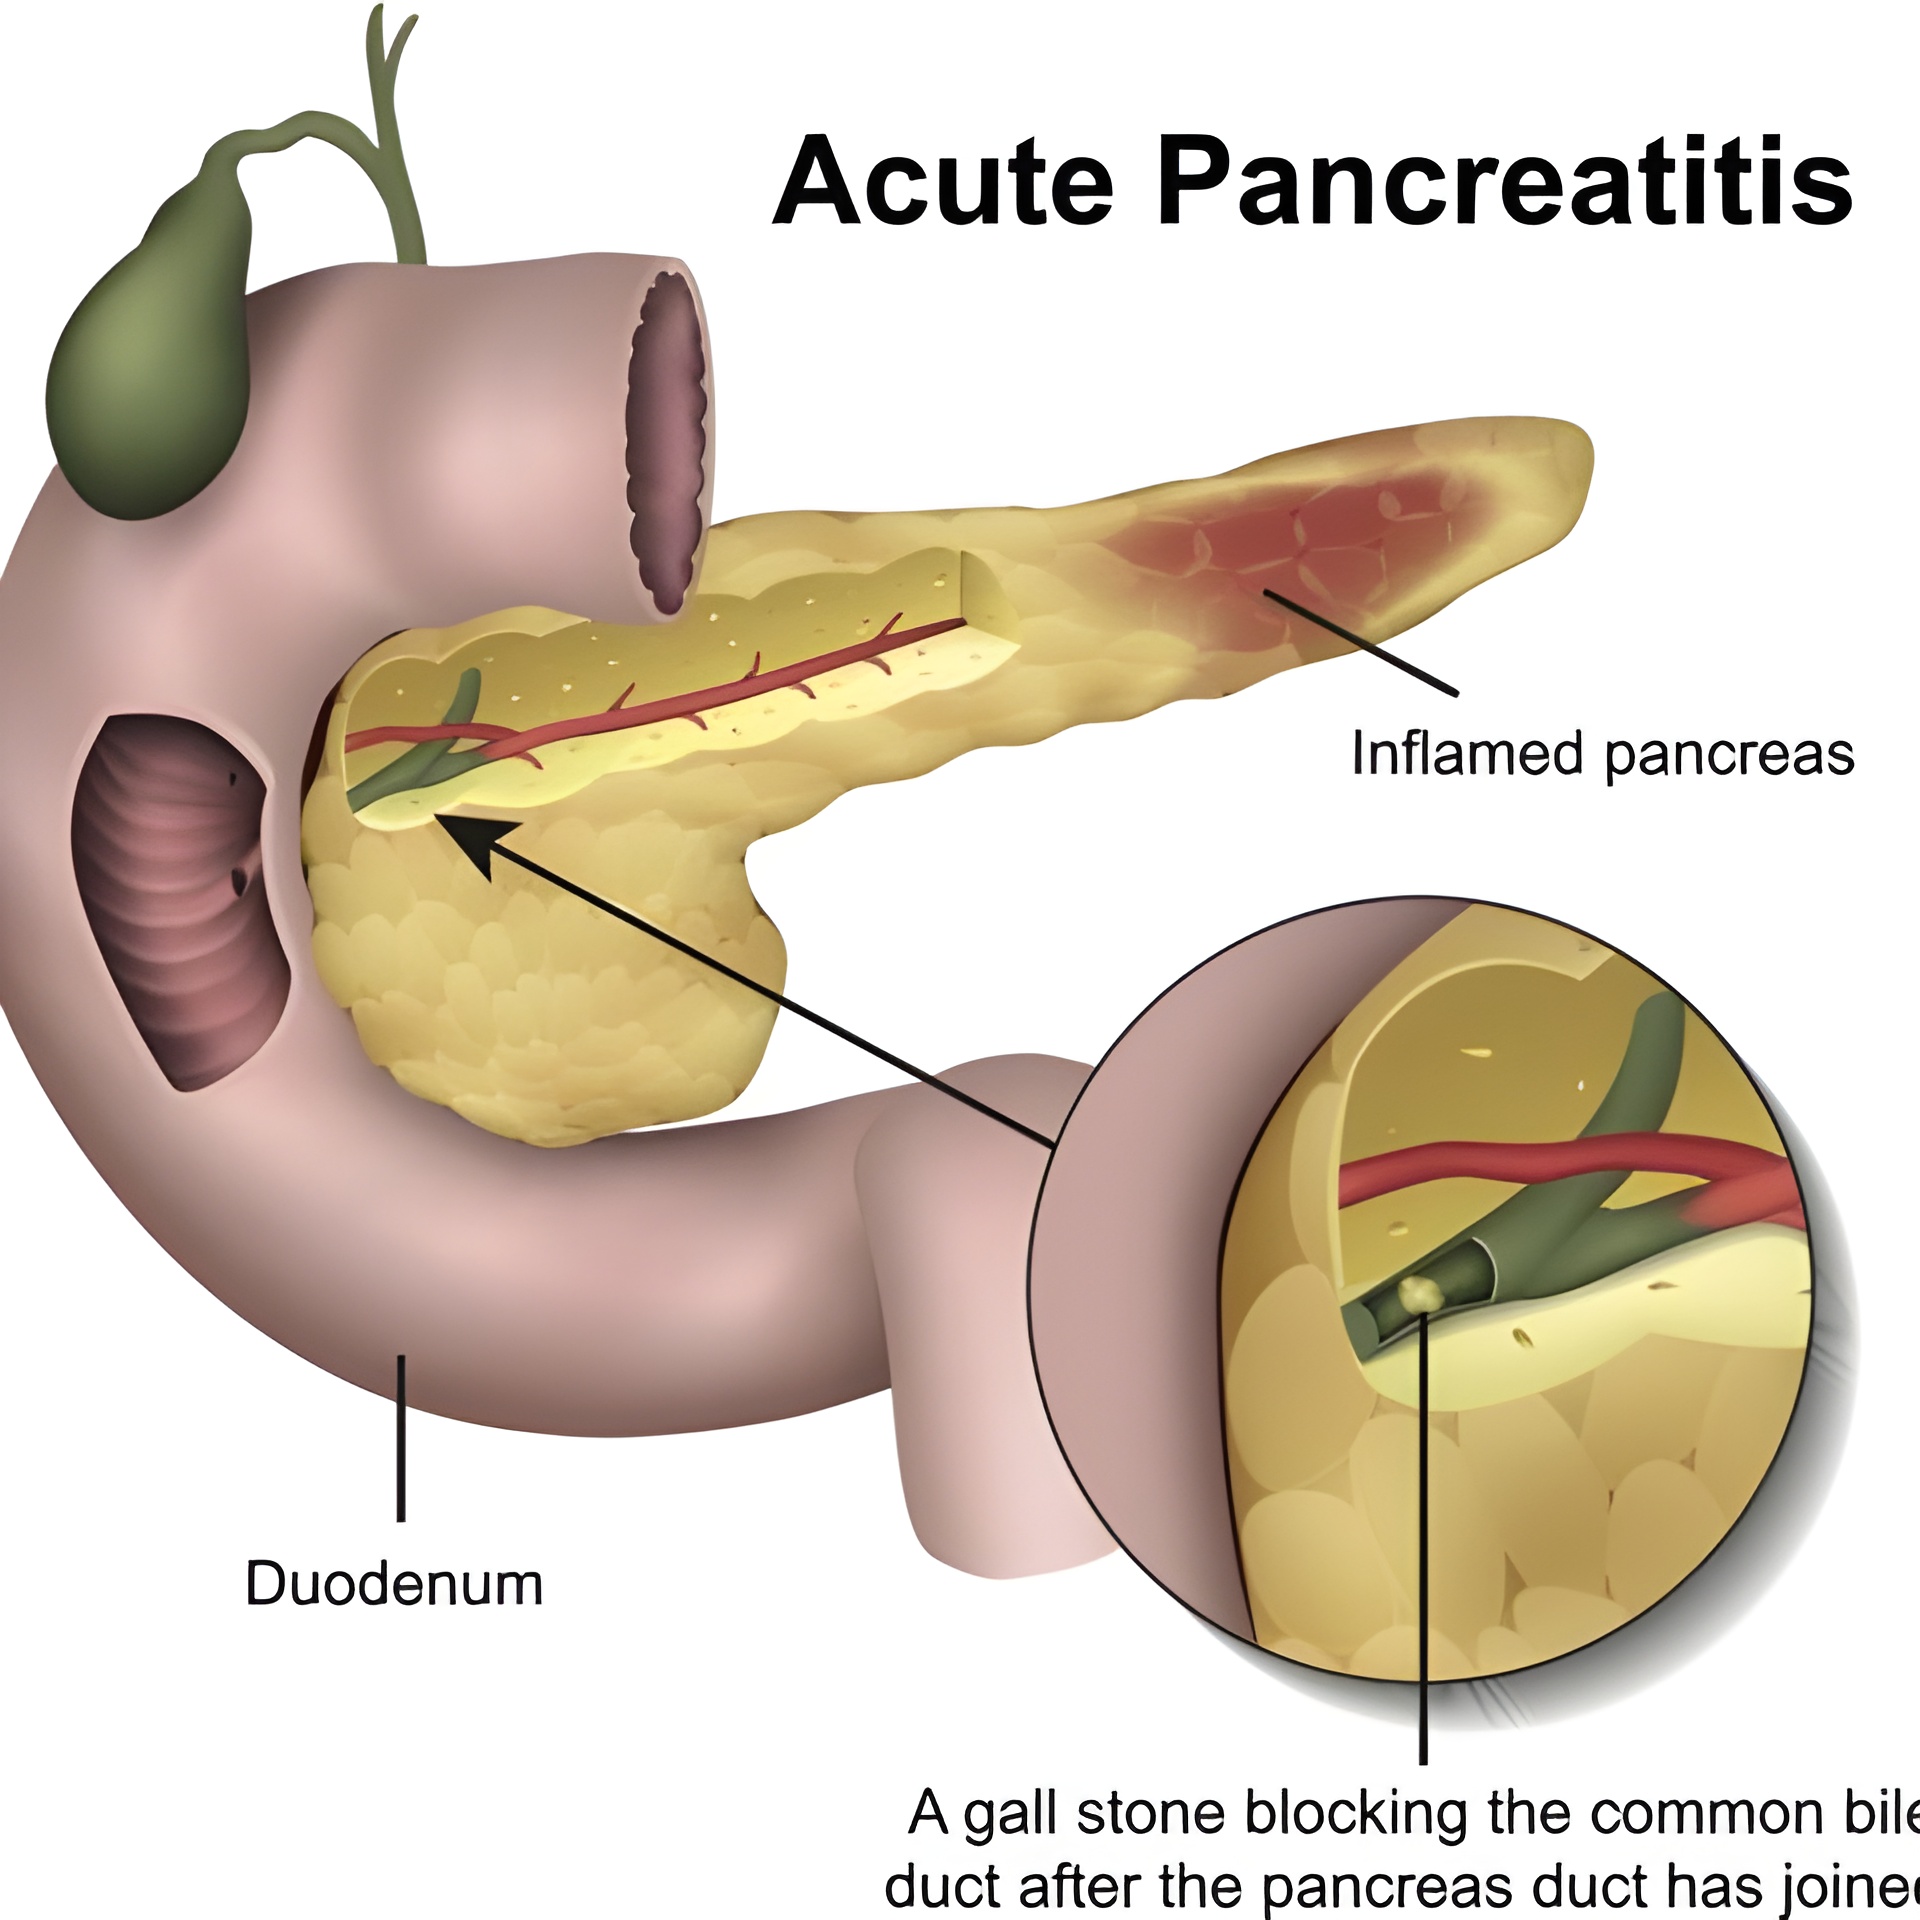 What are the symptoms of acute pancreatitis?